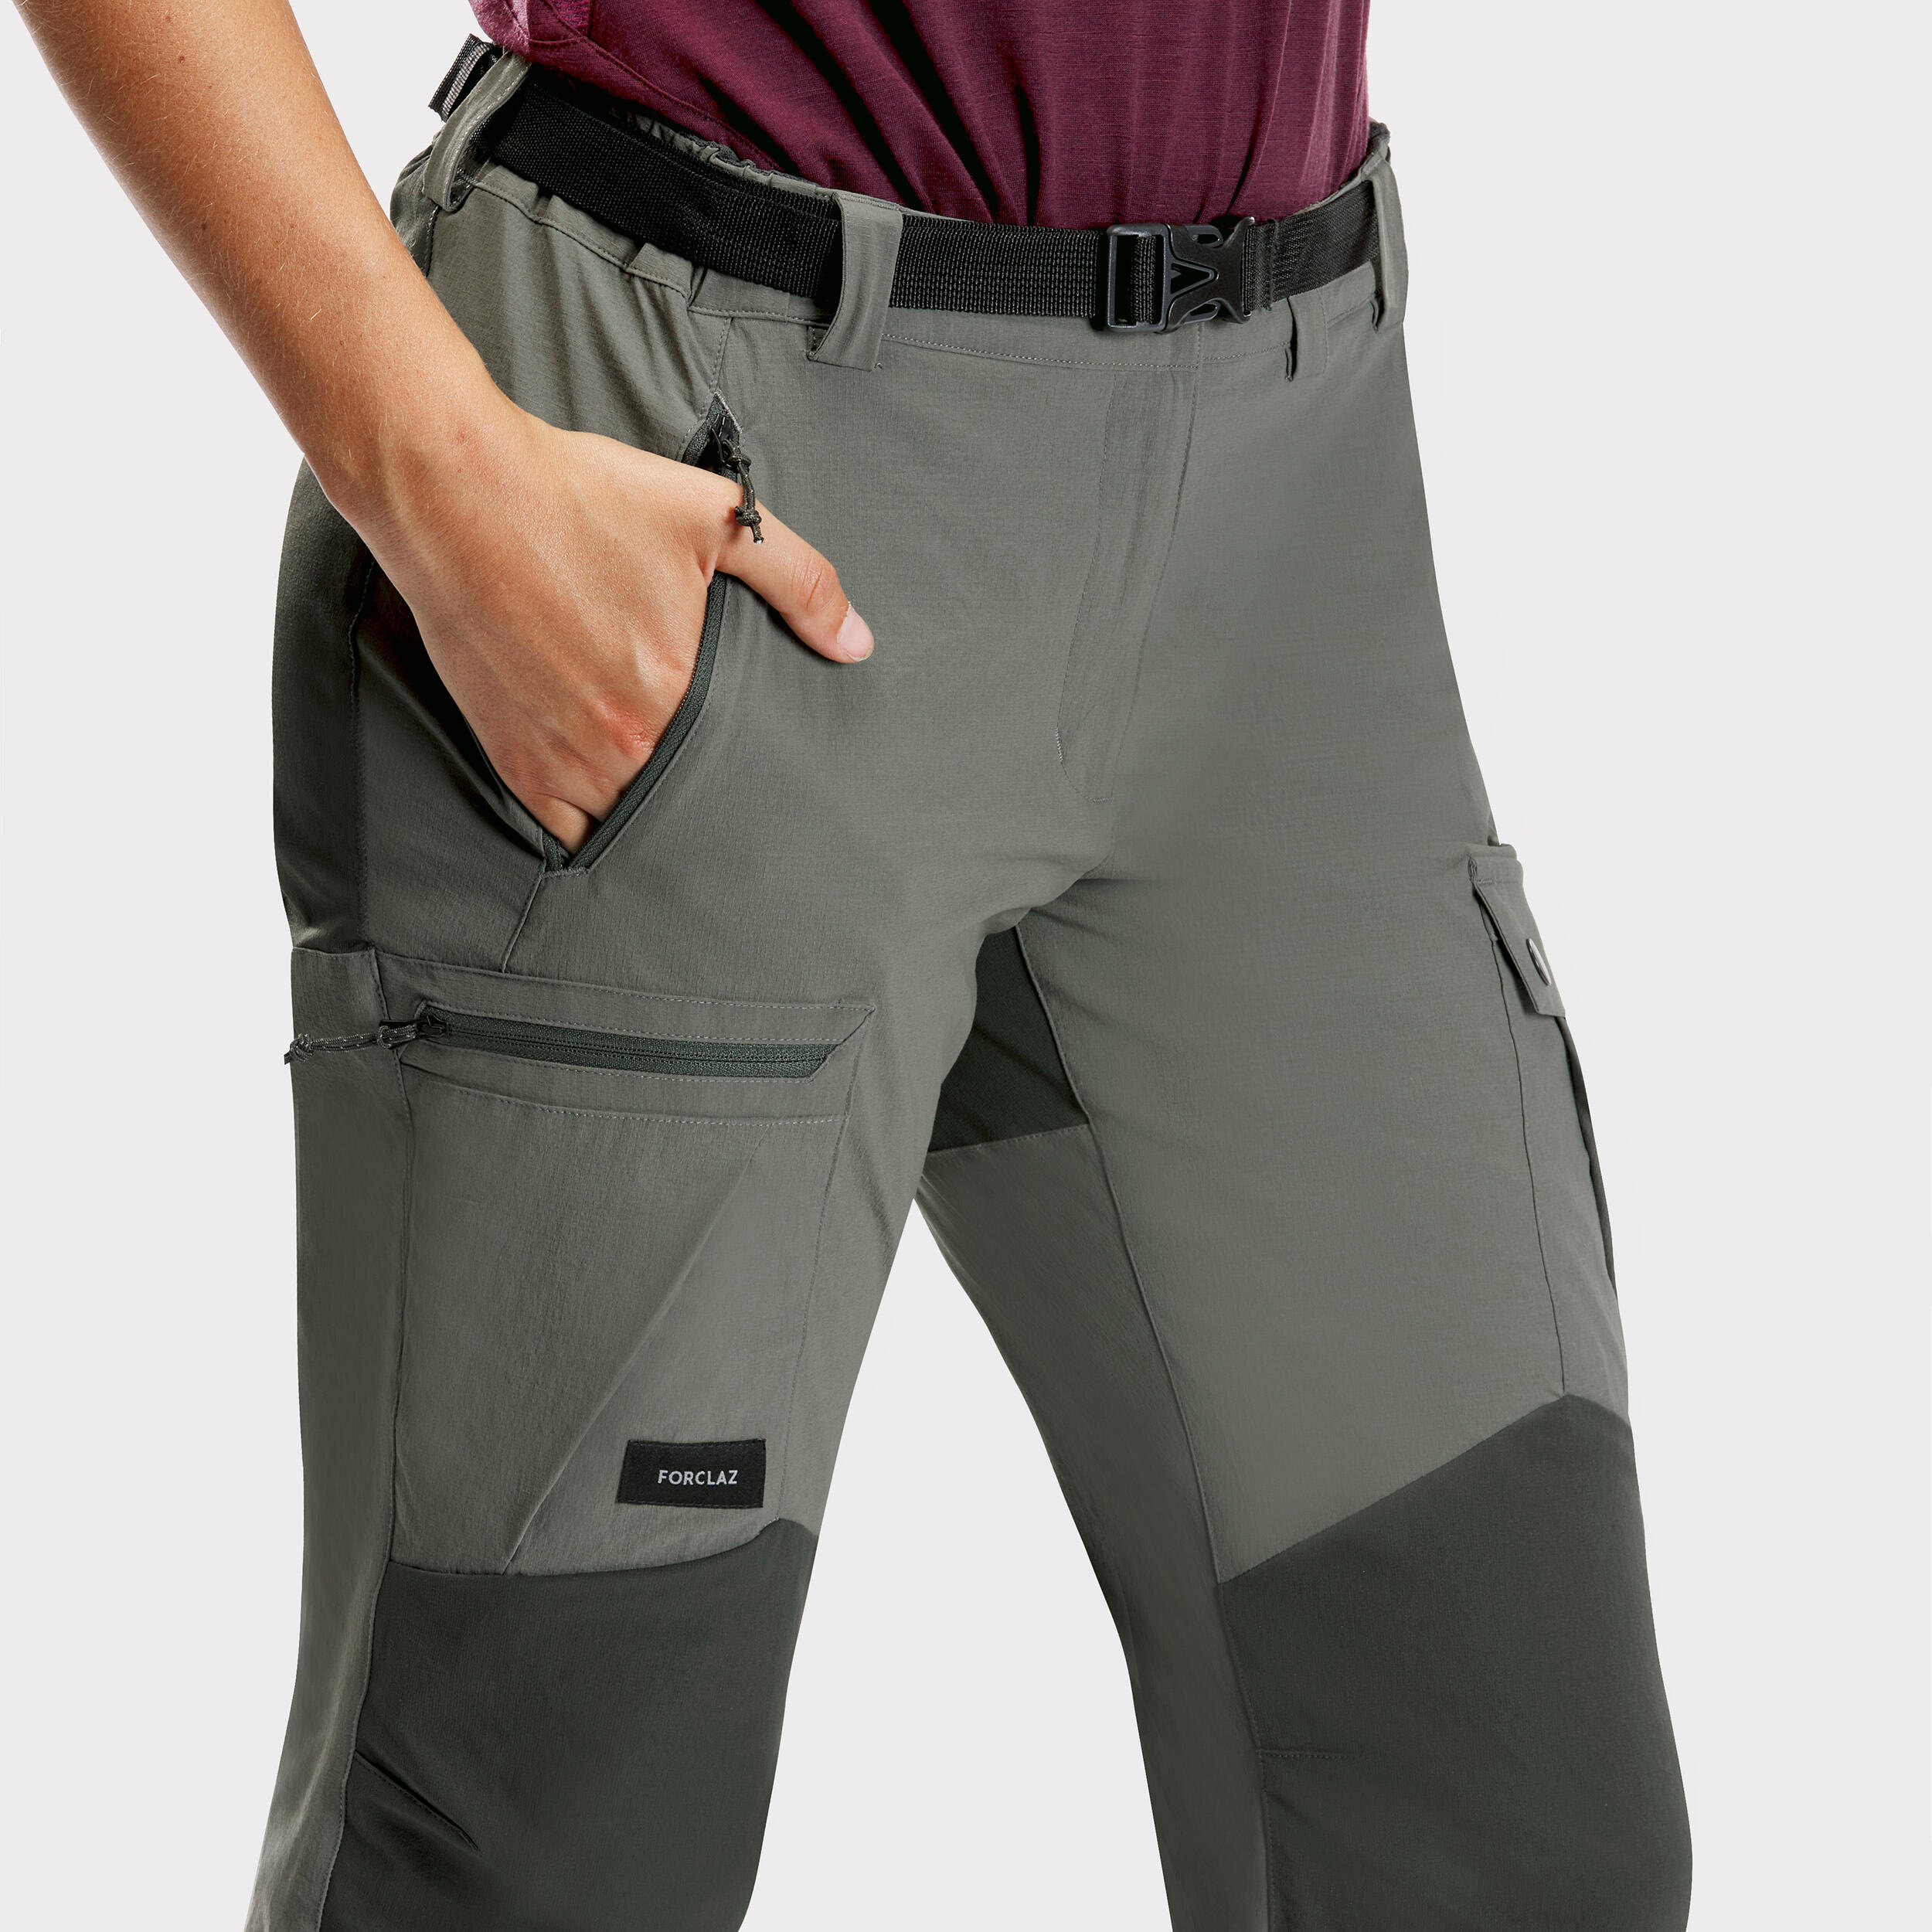 Men Warm Water - Repellent Hiking Trousers - SH 100 ULTRA WARM - YouTube